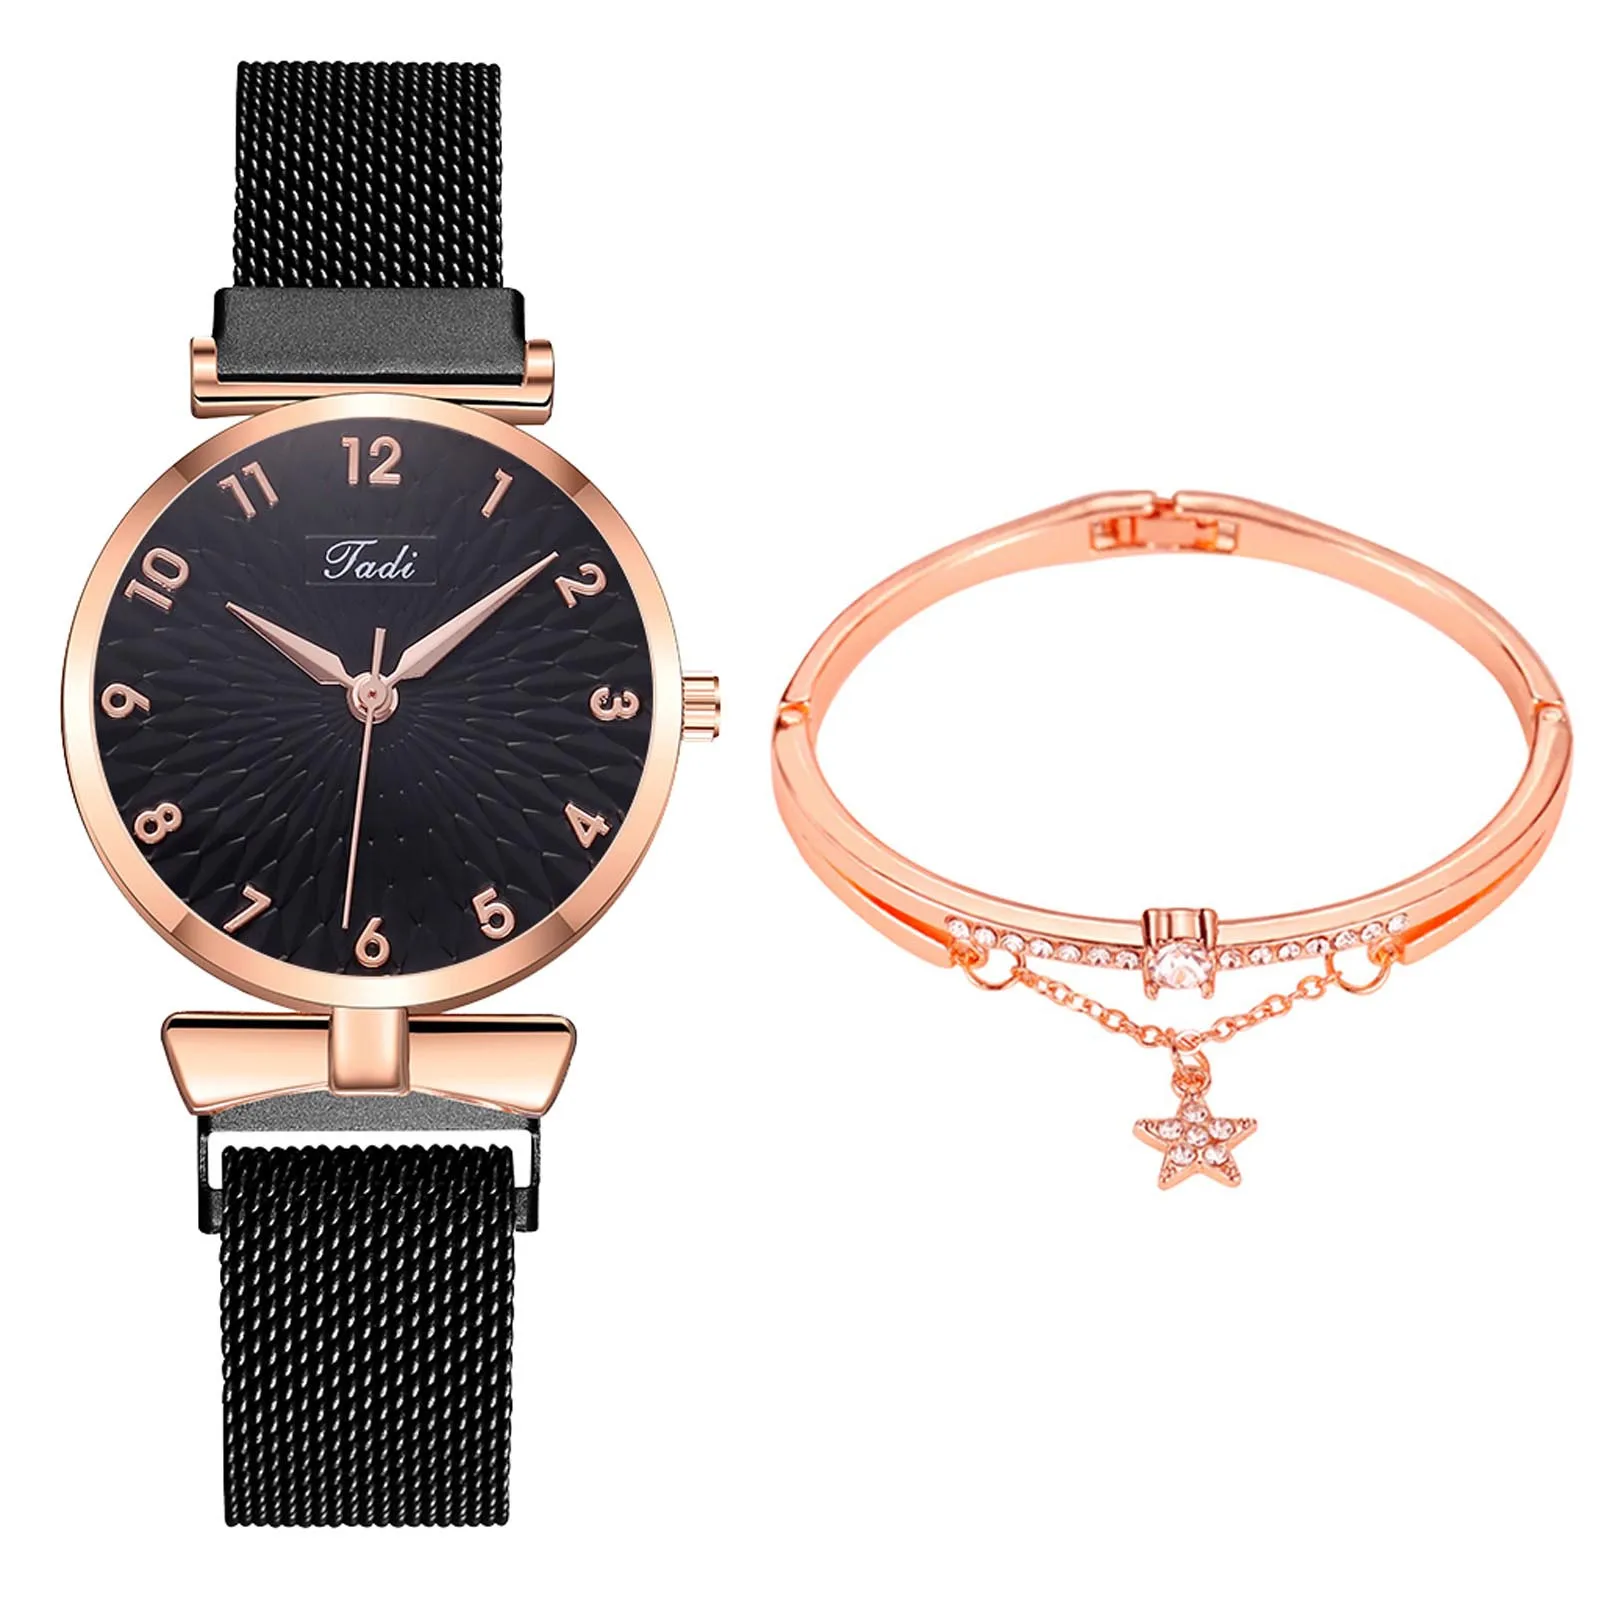 

Low-key Luxury Gadi /t24 Ladies Stainless Steel Steel Band Watch Strap Ladies Watch Also A Great Gift For Family And Friends